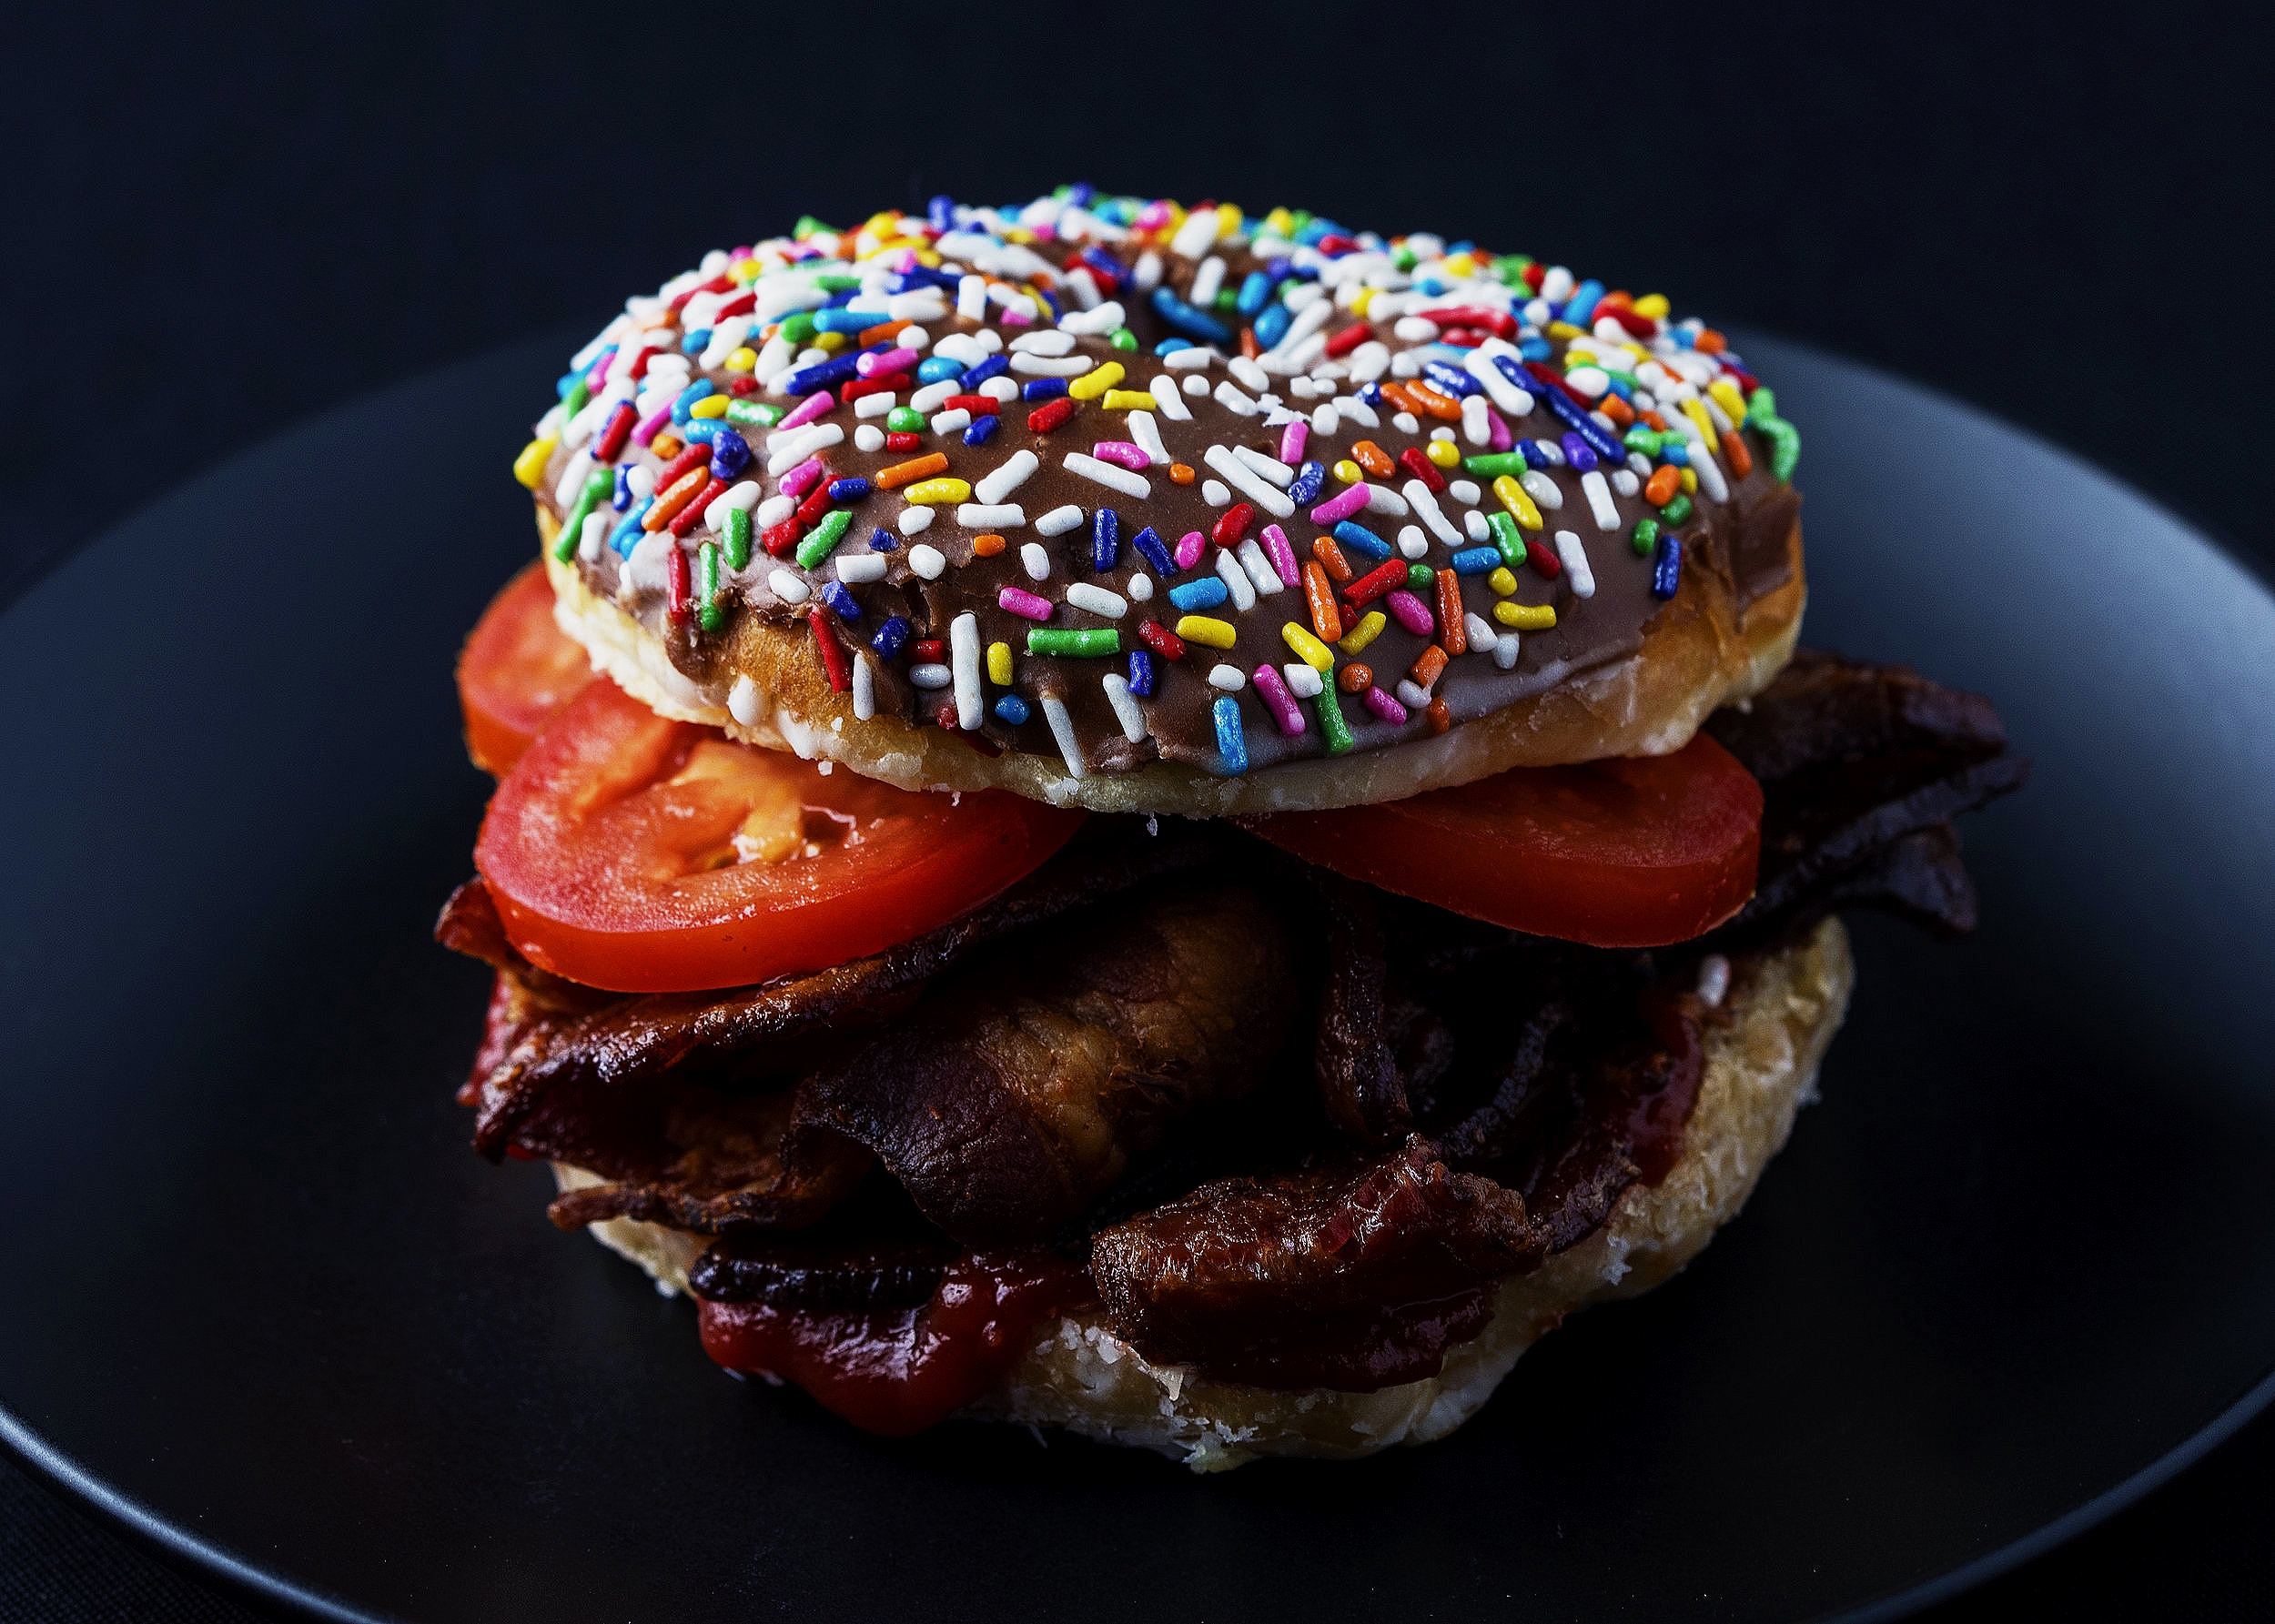 Bacon donut with tomato and ketchup on chocolate sprinkle donut